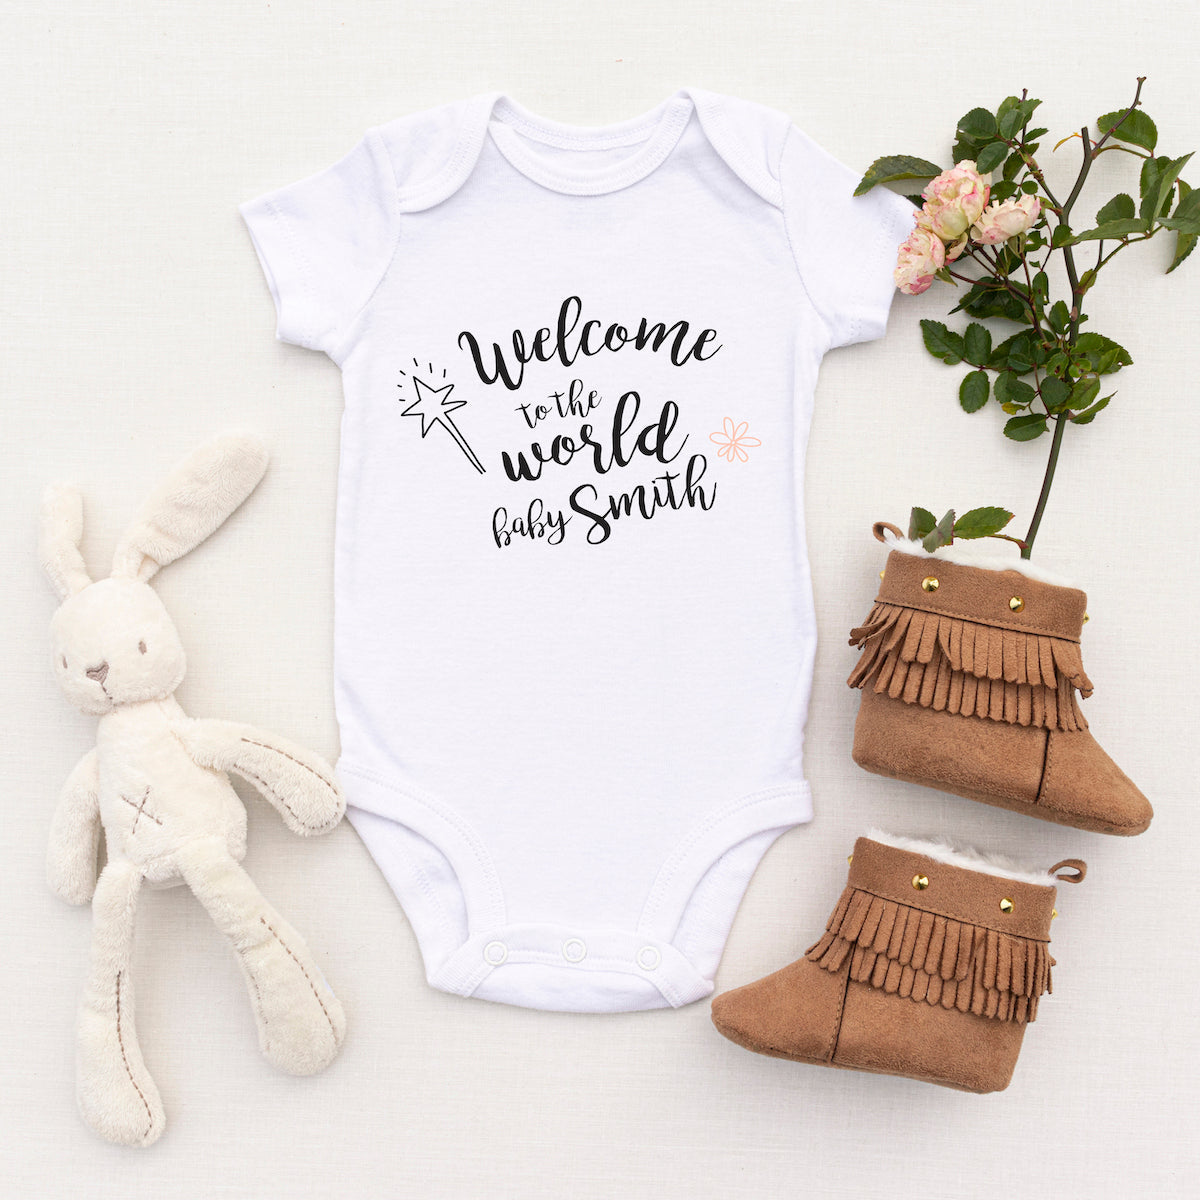 Personalised White Baby Body Suit Grow Vest - Sparkle Wand